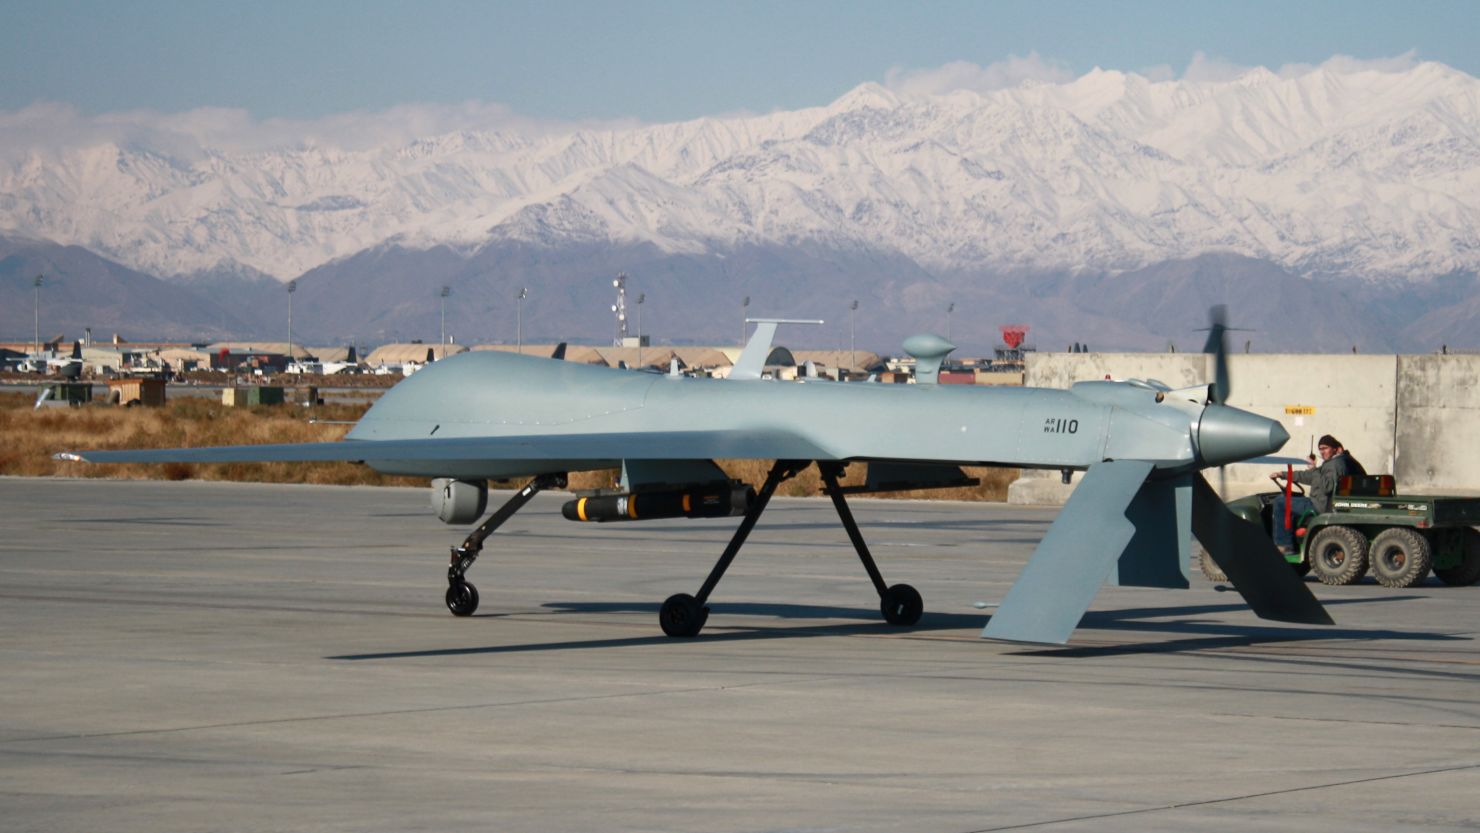 A U.S. Predator unmanned drone armed with a missile sets off from its hangar at Bagram Air Base on November 27, 2009.